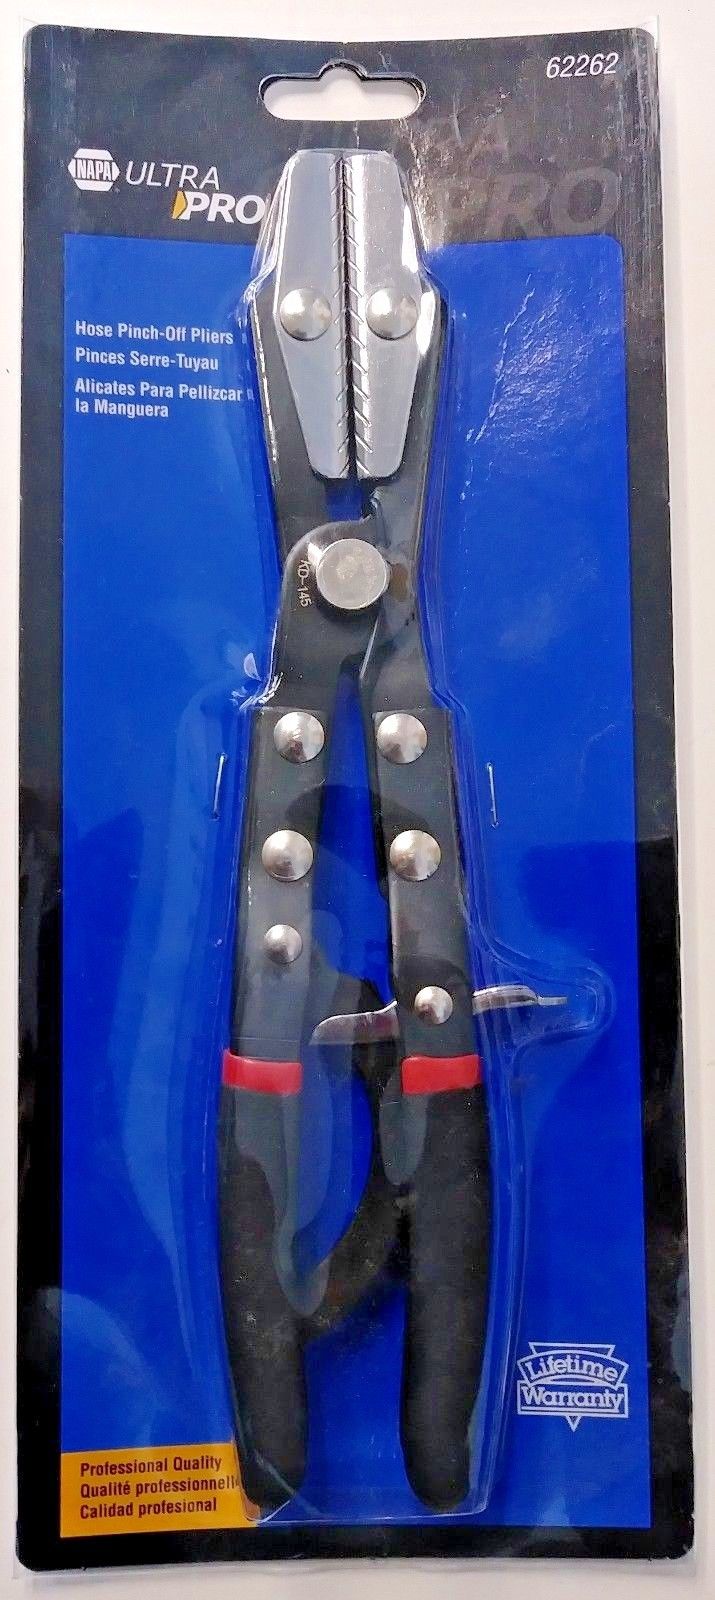 Iron Canvas Pliers, Dual Design with Hammer & Jaw Gripper, Canvas